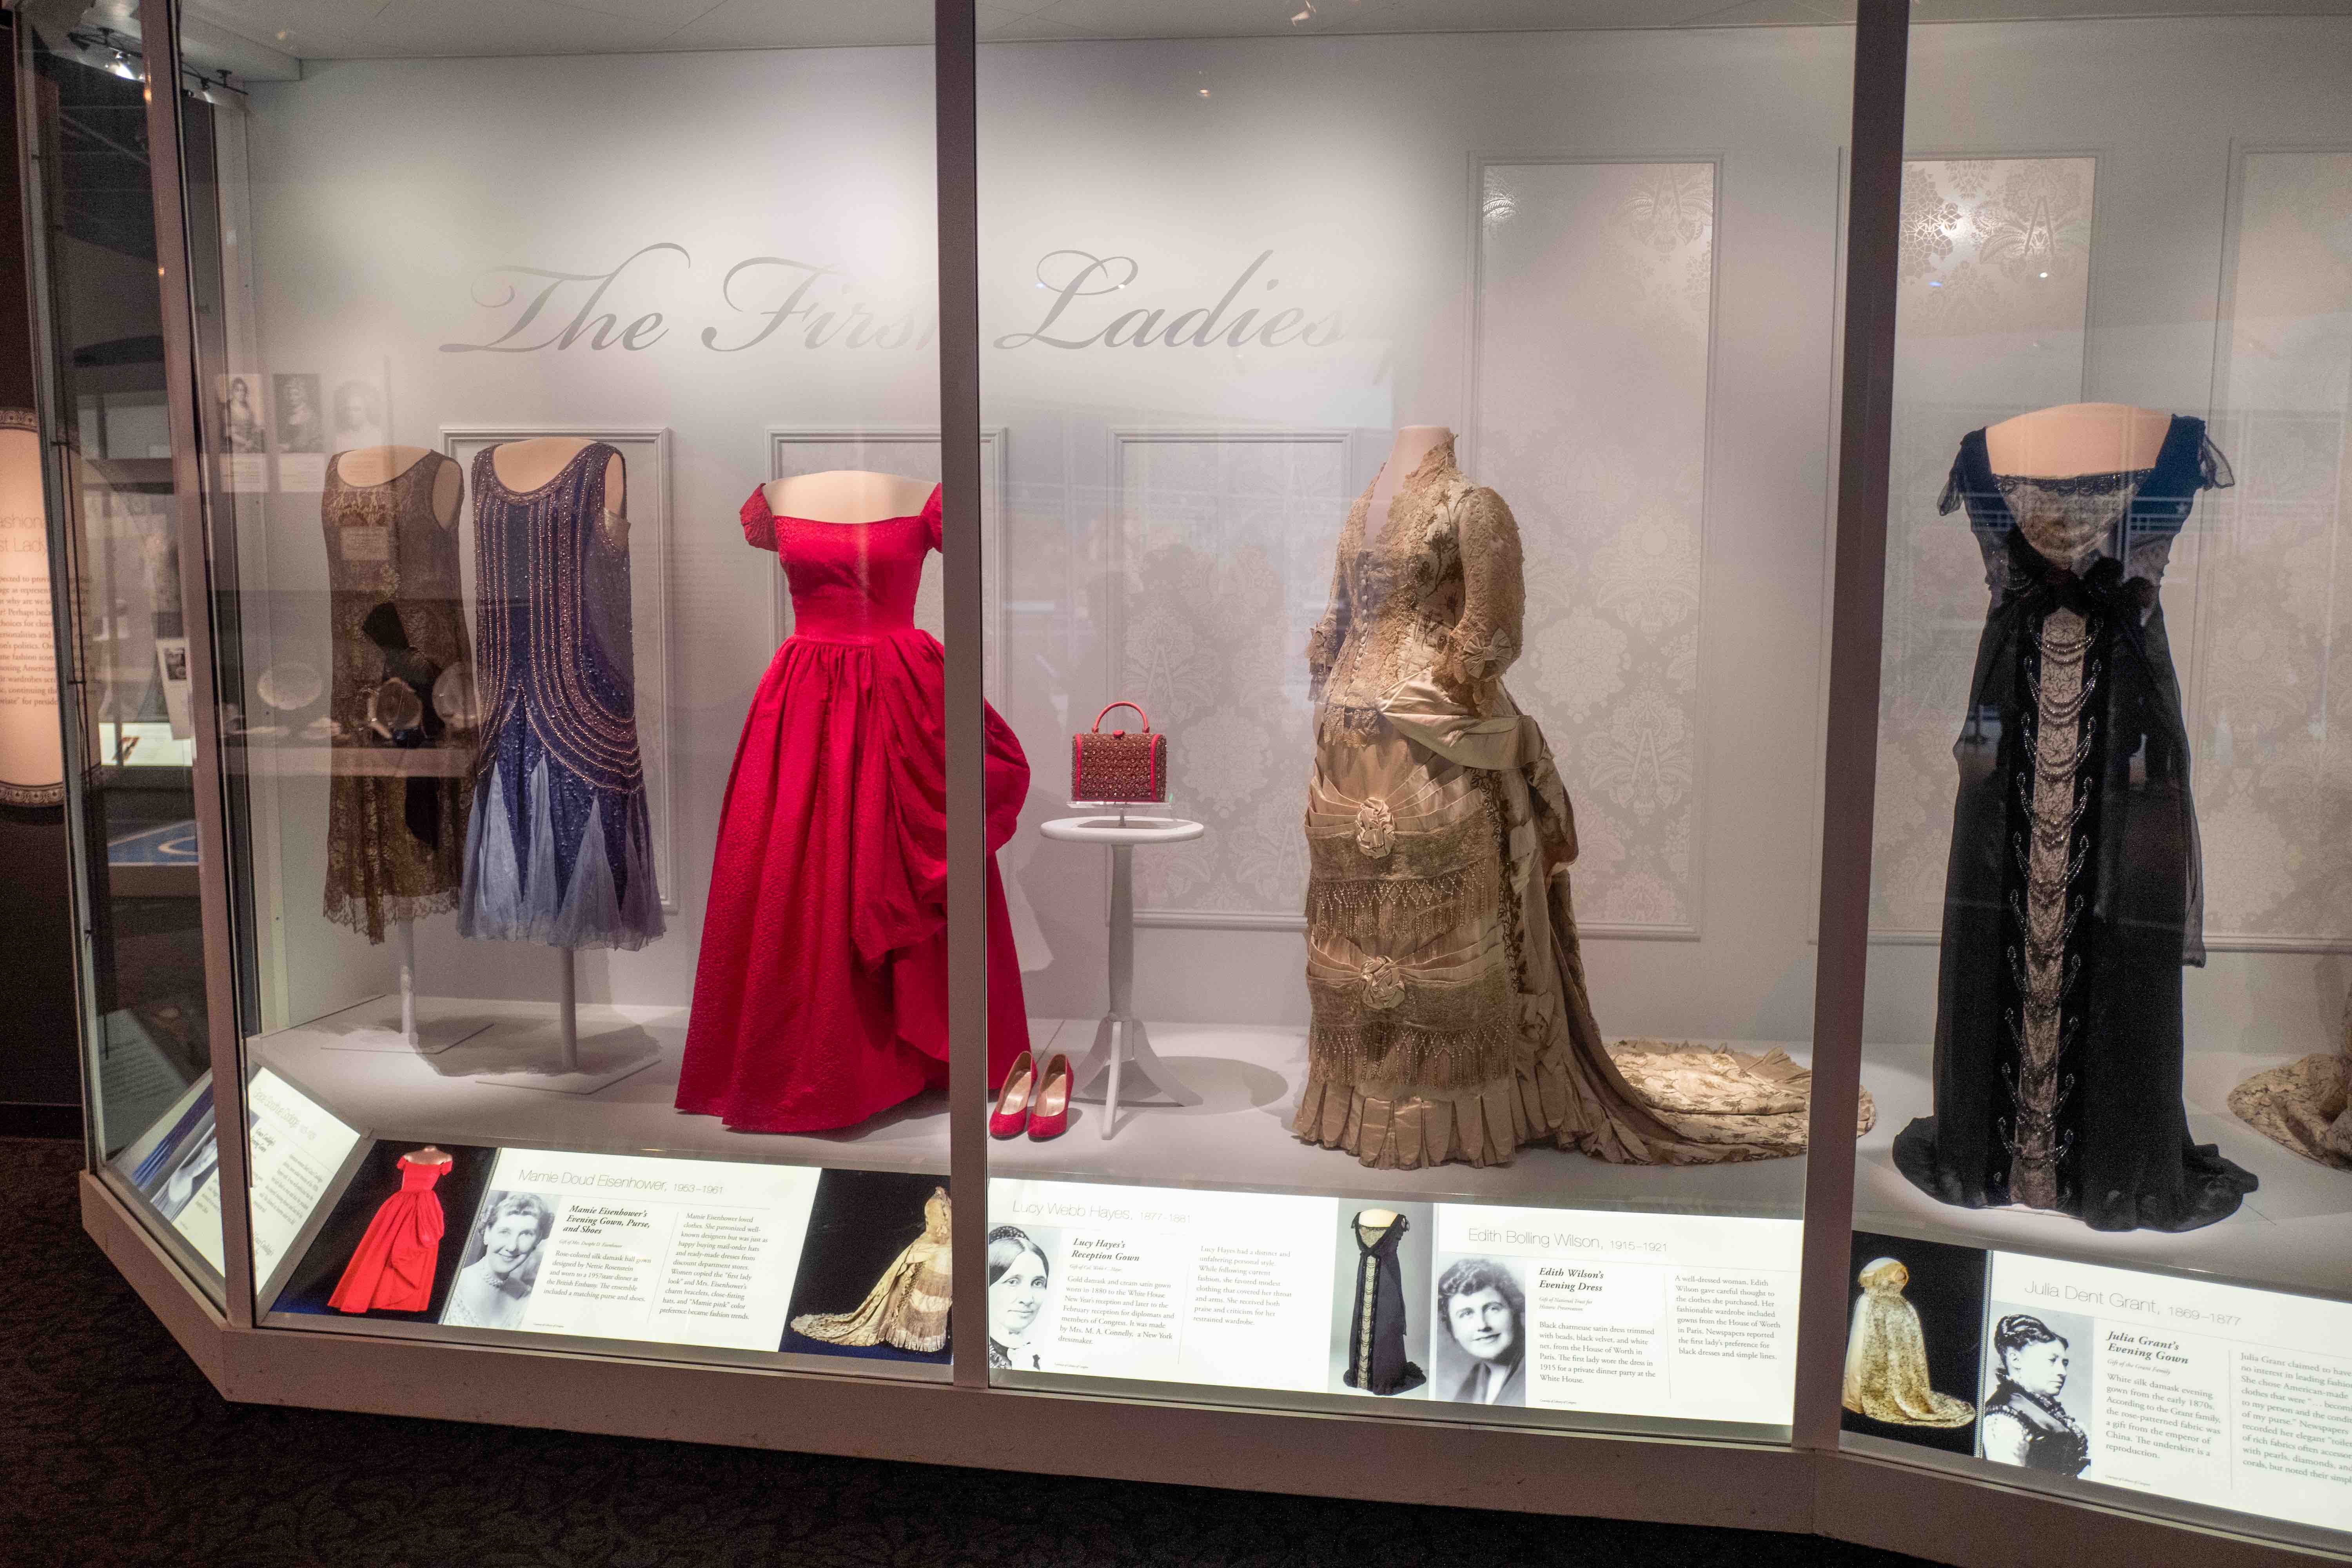 Go Inside the Smithsonian's 'First Ladies' Gallery